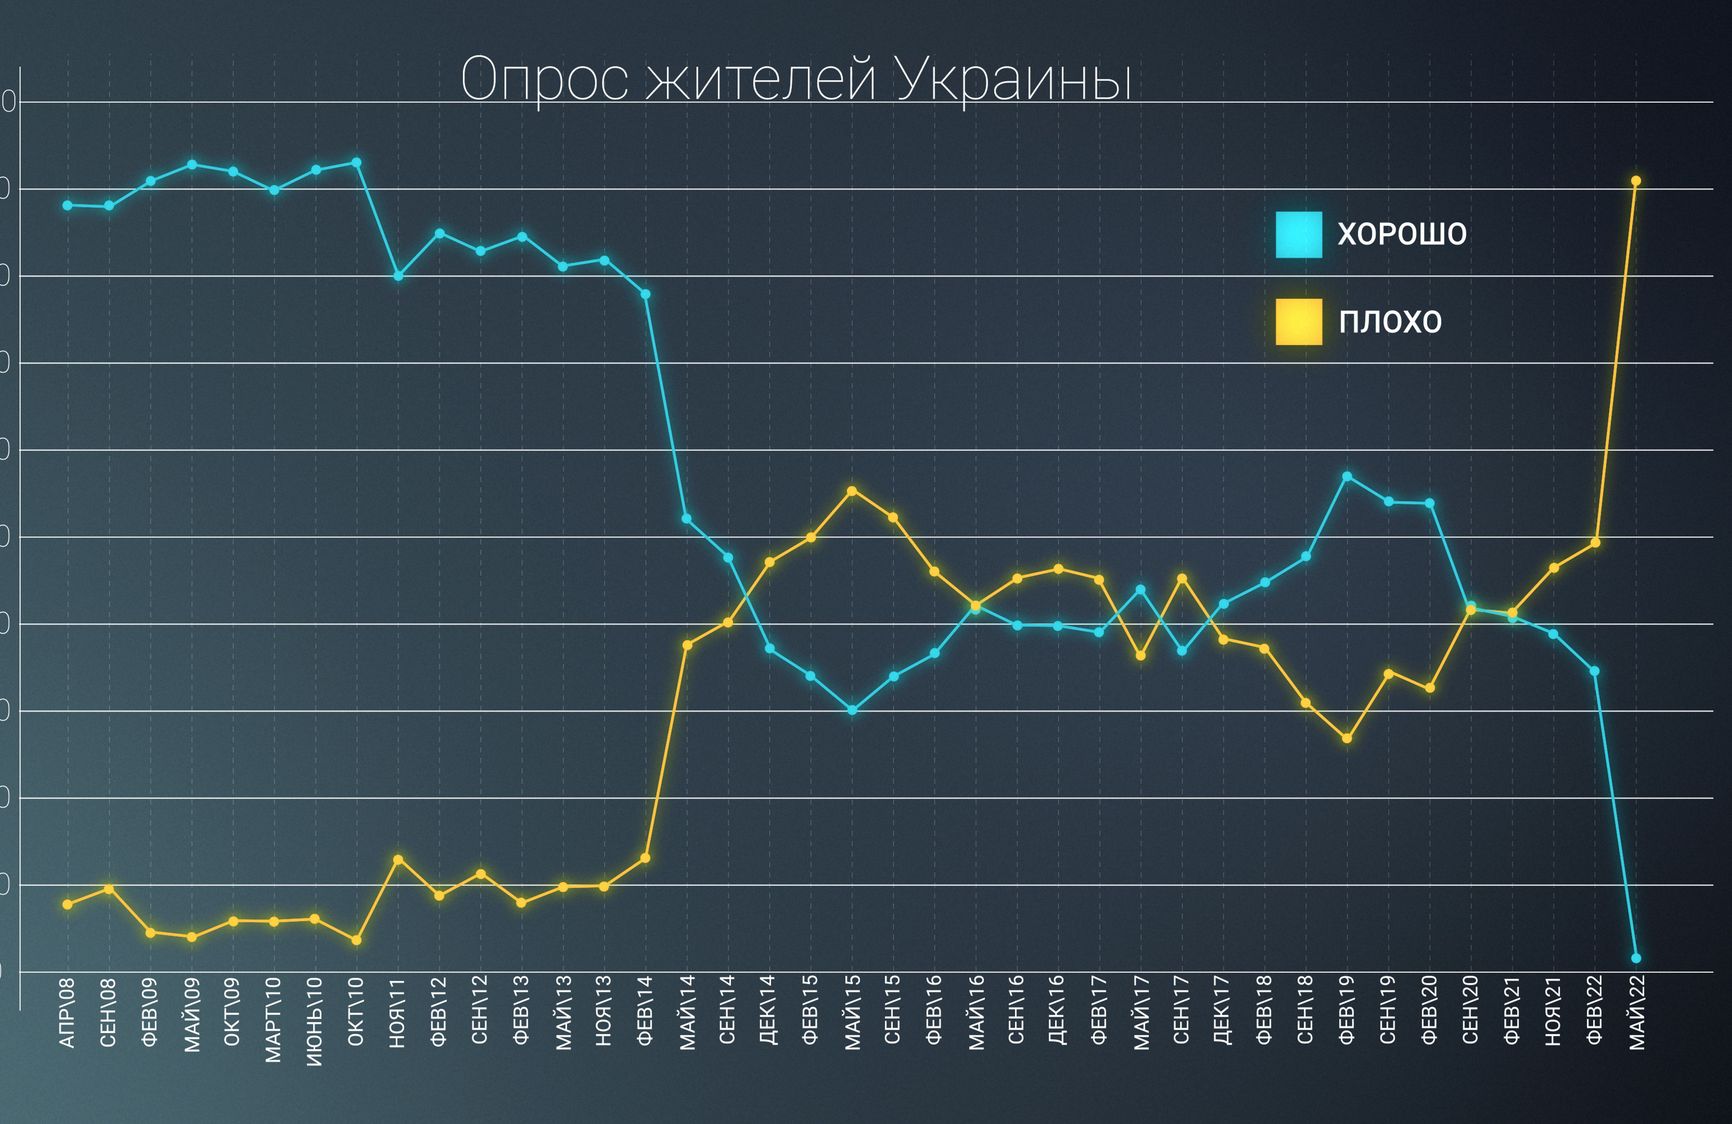 Changes in good and bad attitude of Ukrainians towards Russia